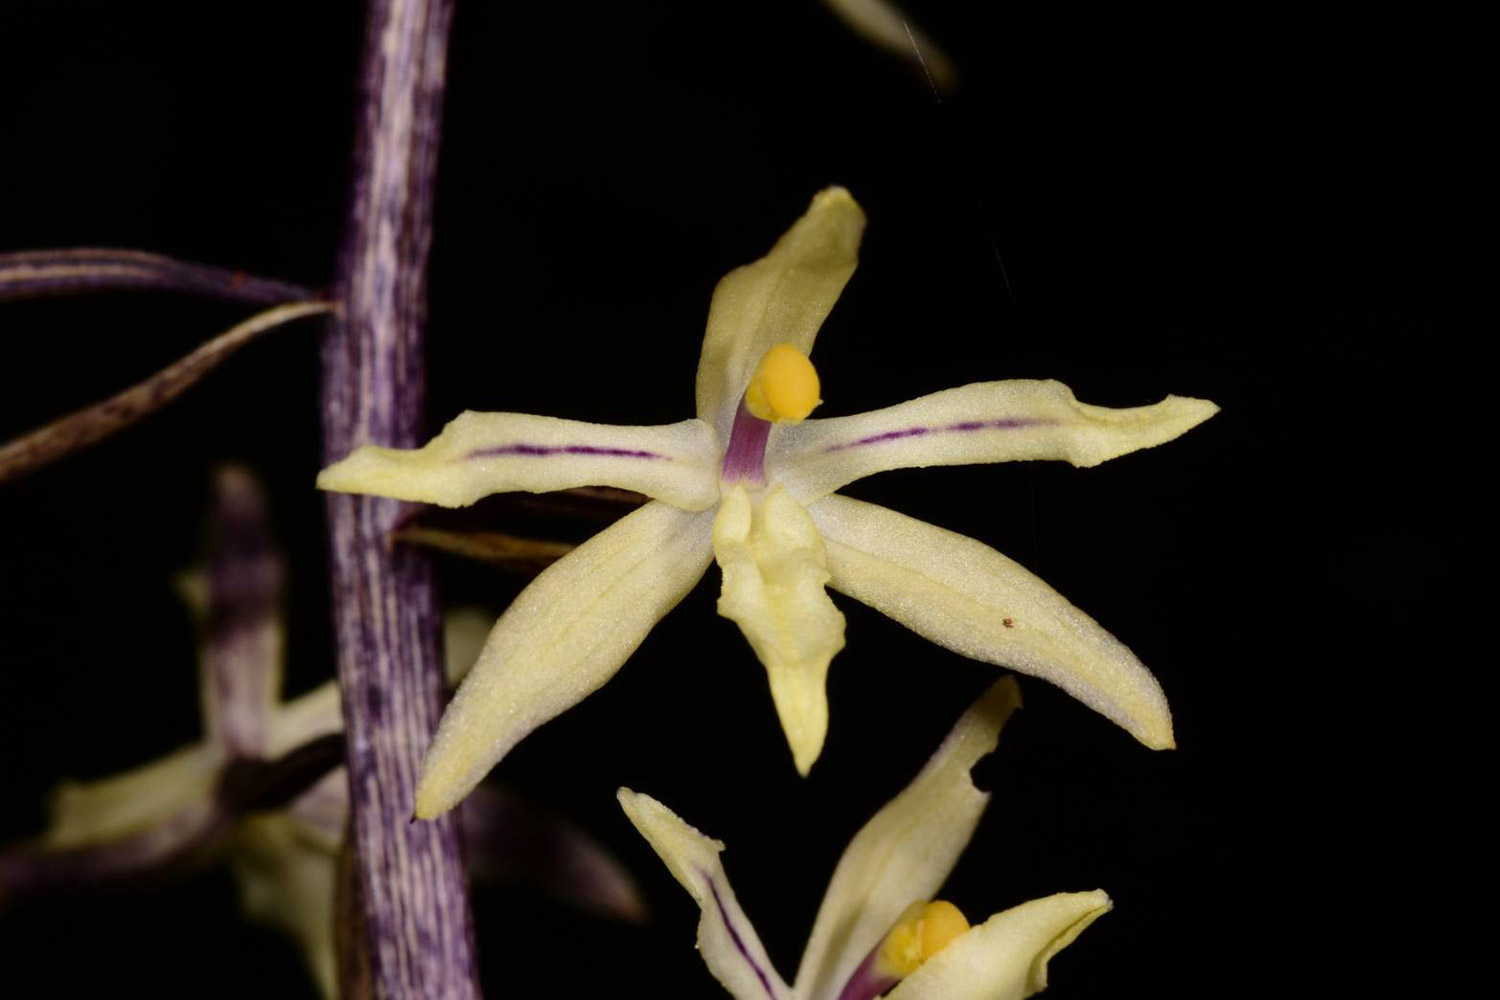 Researchers in Thailand Discover Rare New Orchid Species